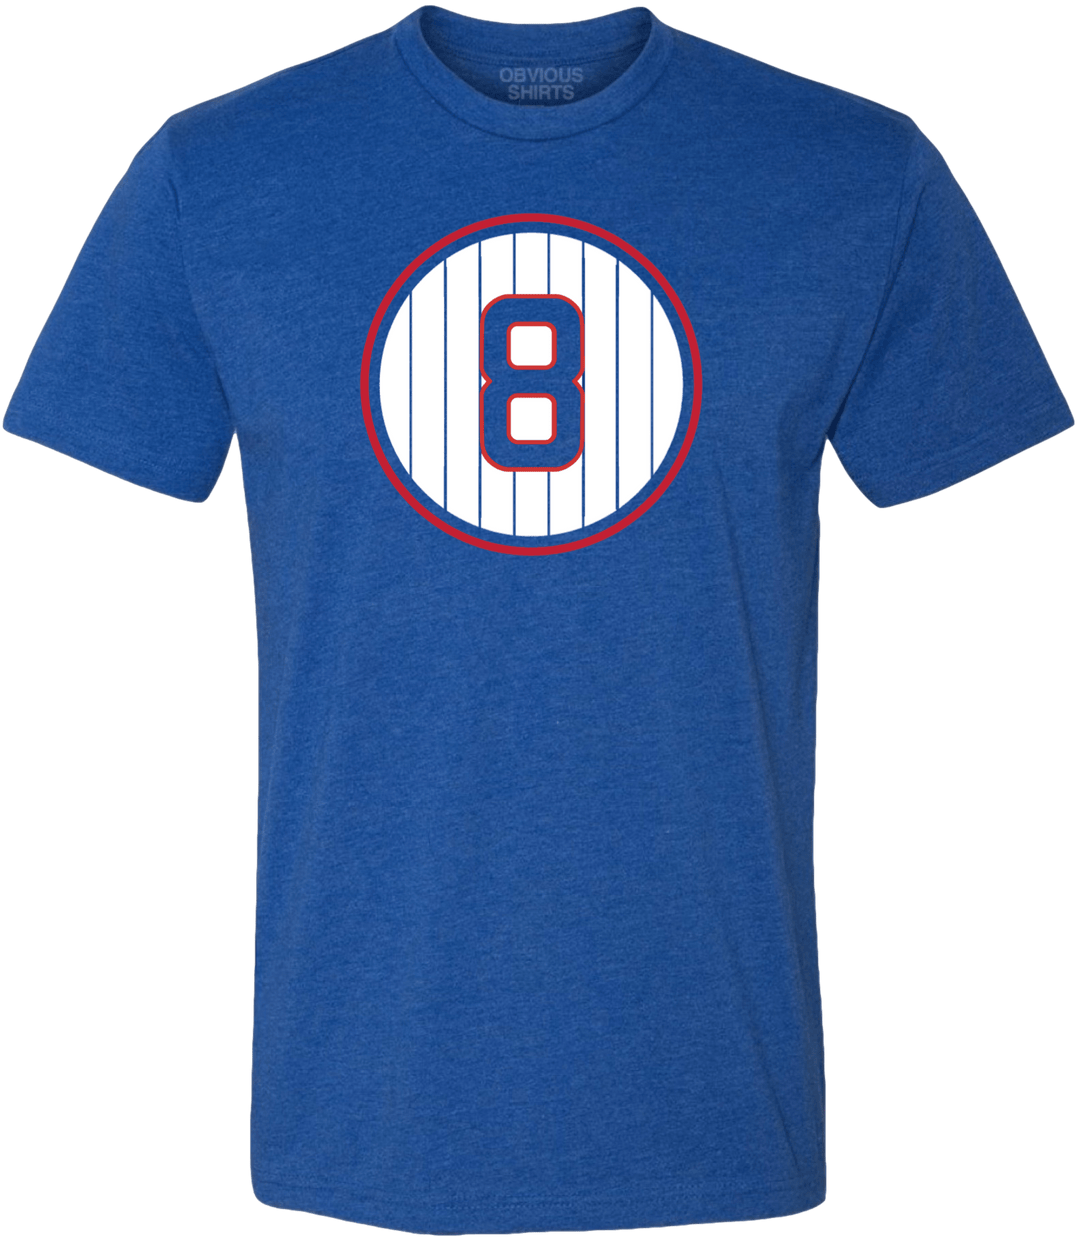 ANDRE DAWSON NUMBER 8 LOGO. - OBVIOUS SHIRTS